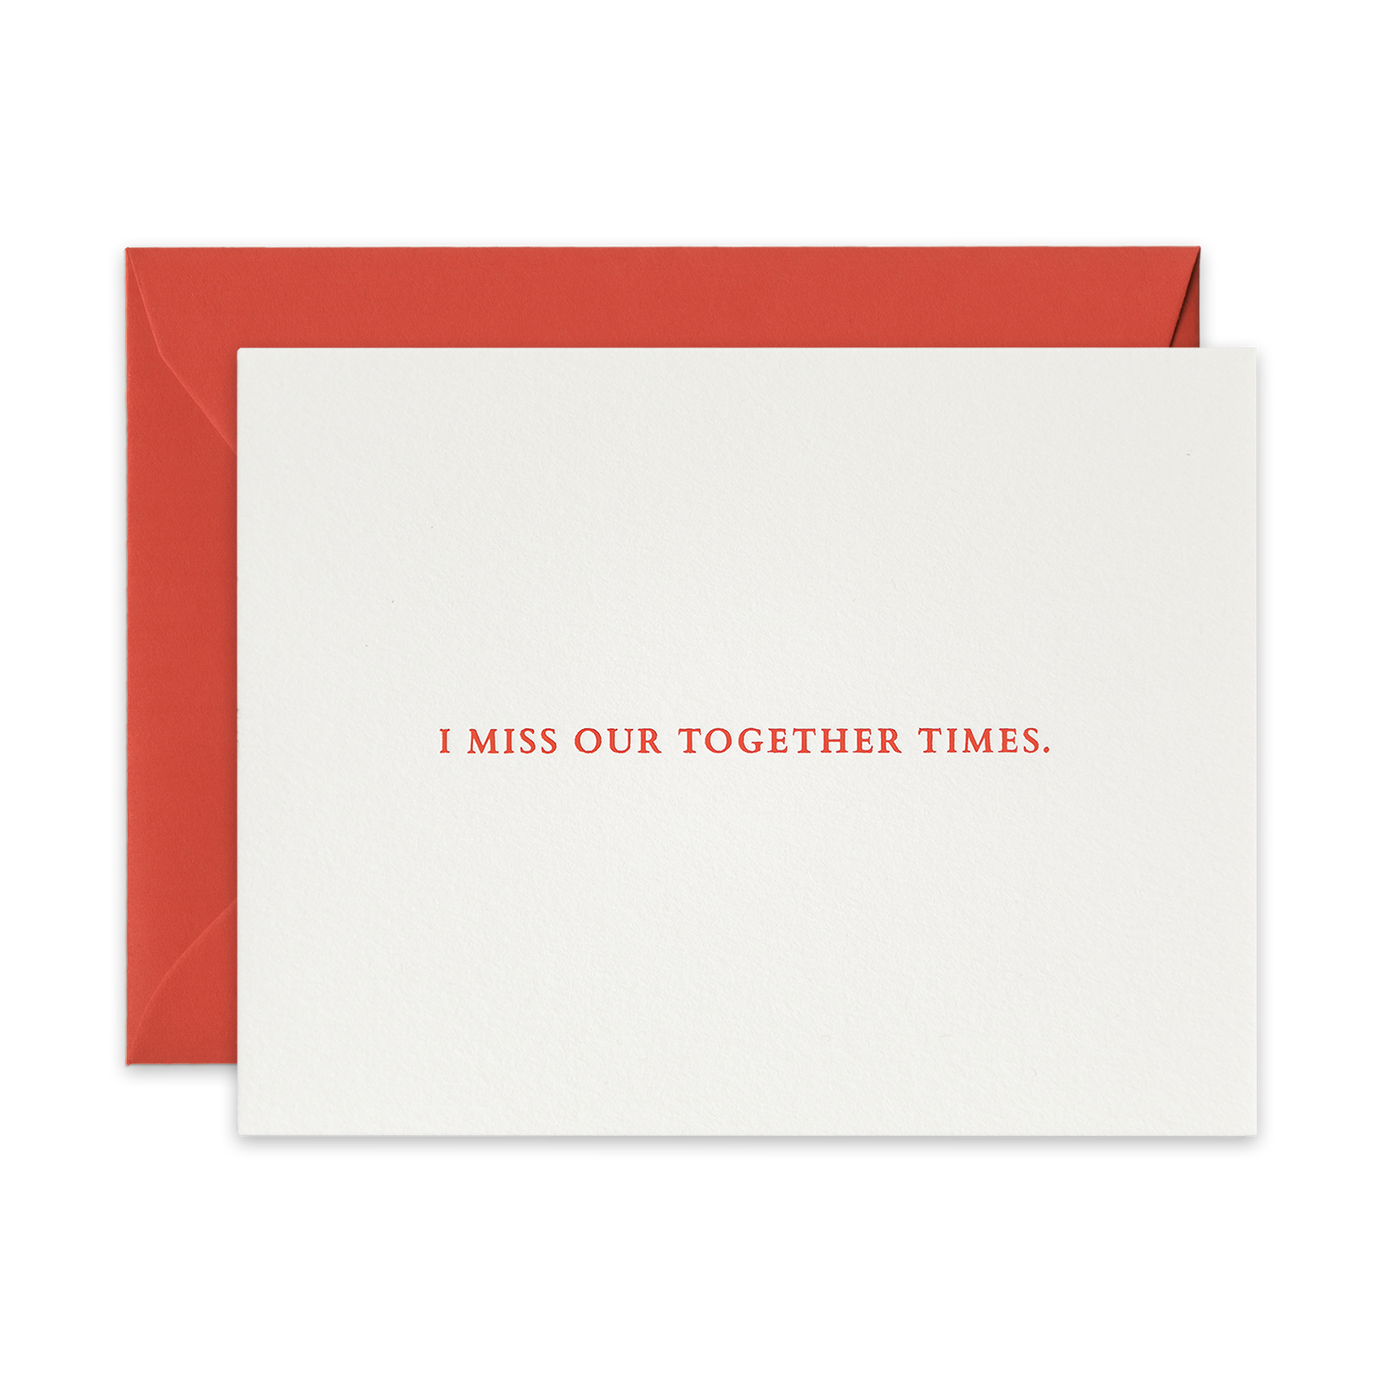 Peach foil letterpress greeting card by beknown. I miss our together times.